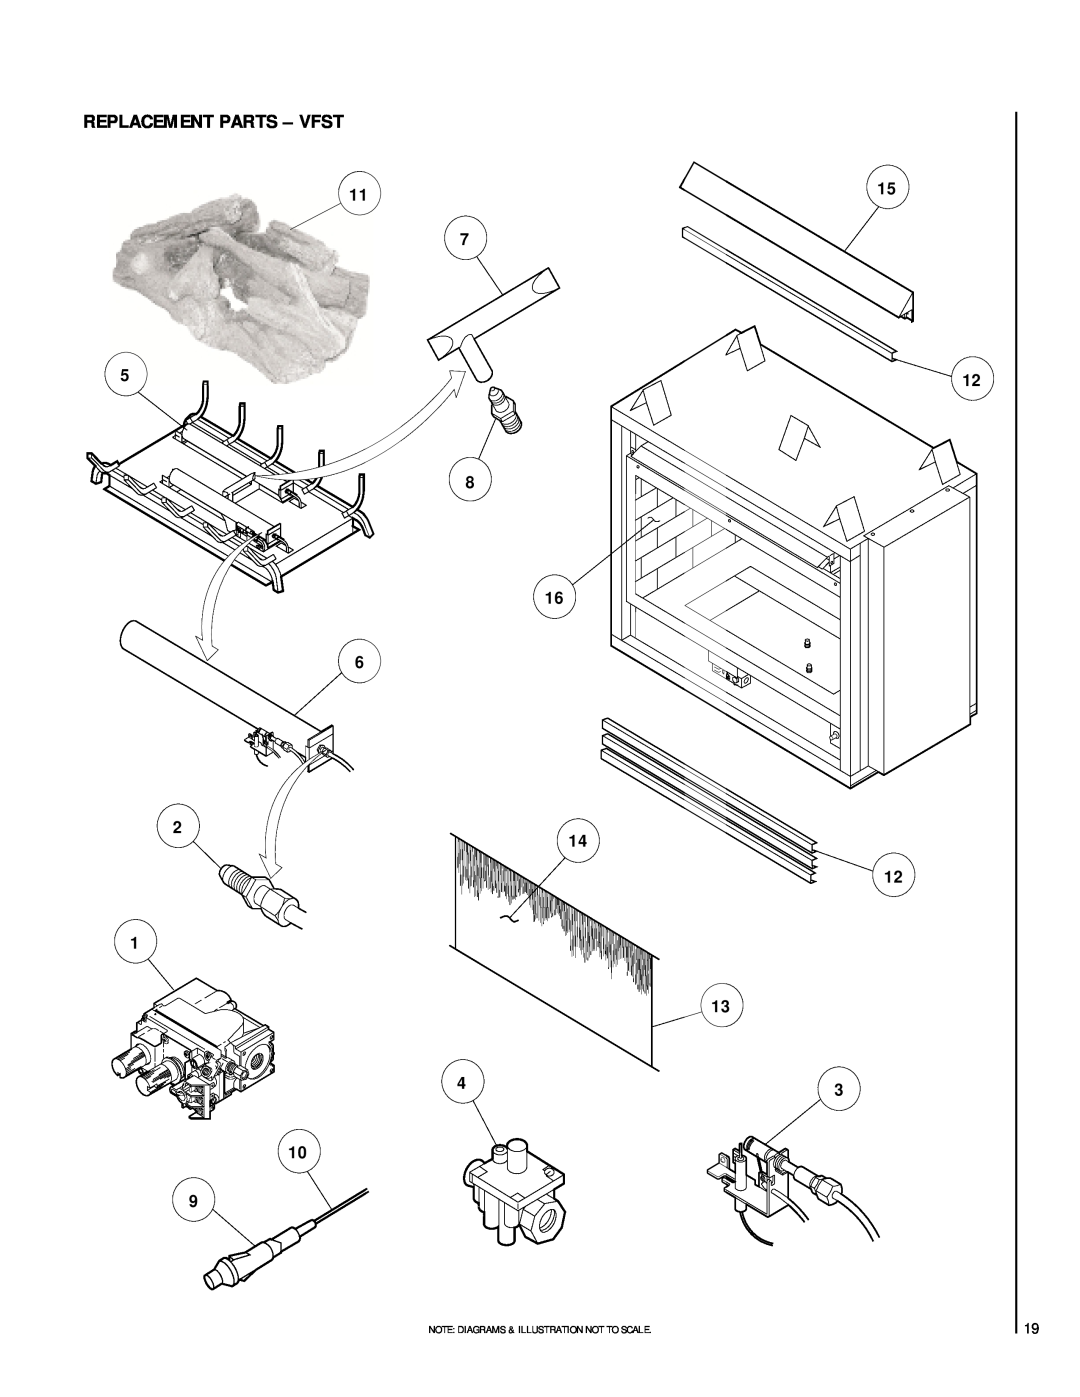 TOA Electronics VFST-CMN-2 dimensions Replacement Parts - Vfst, 14 12, Note Diagrams & Illustration Not To Scale 